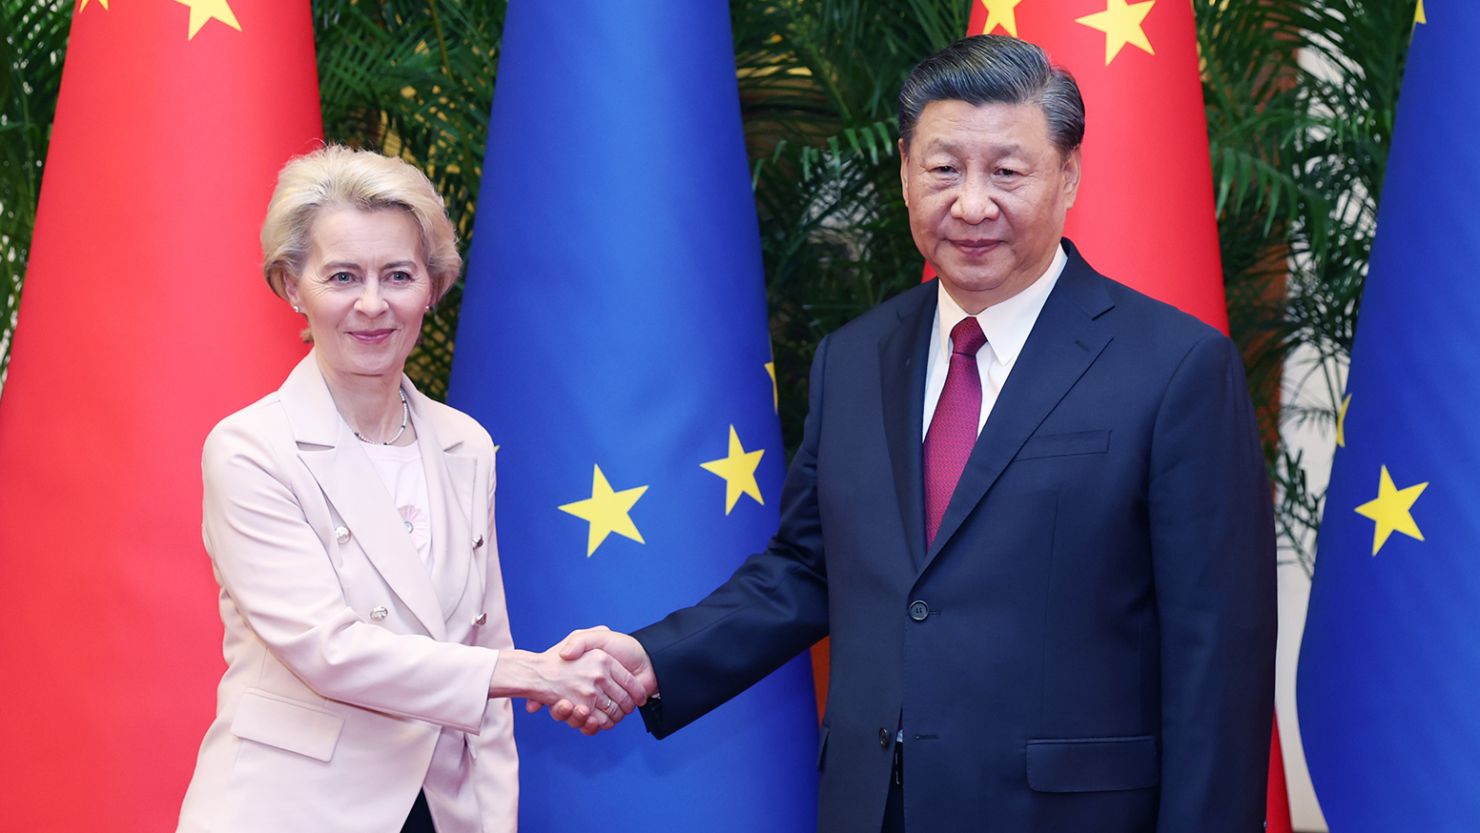 Analyst: Europe Should Rethink China Policy After Party Congress, Ukraine  Stance